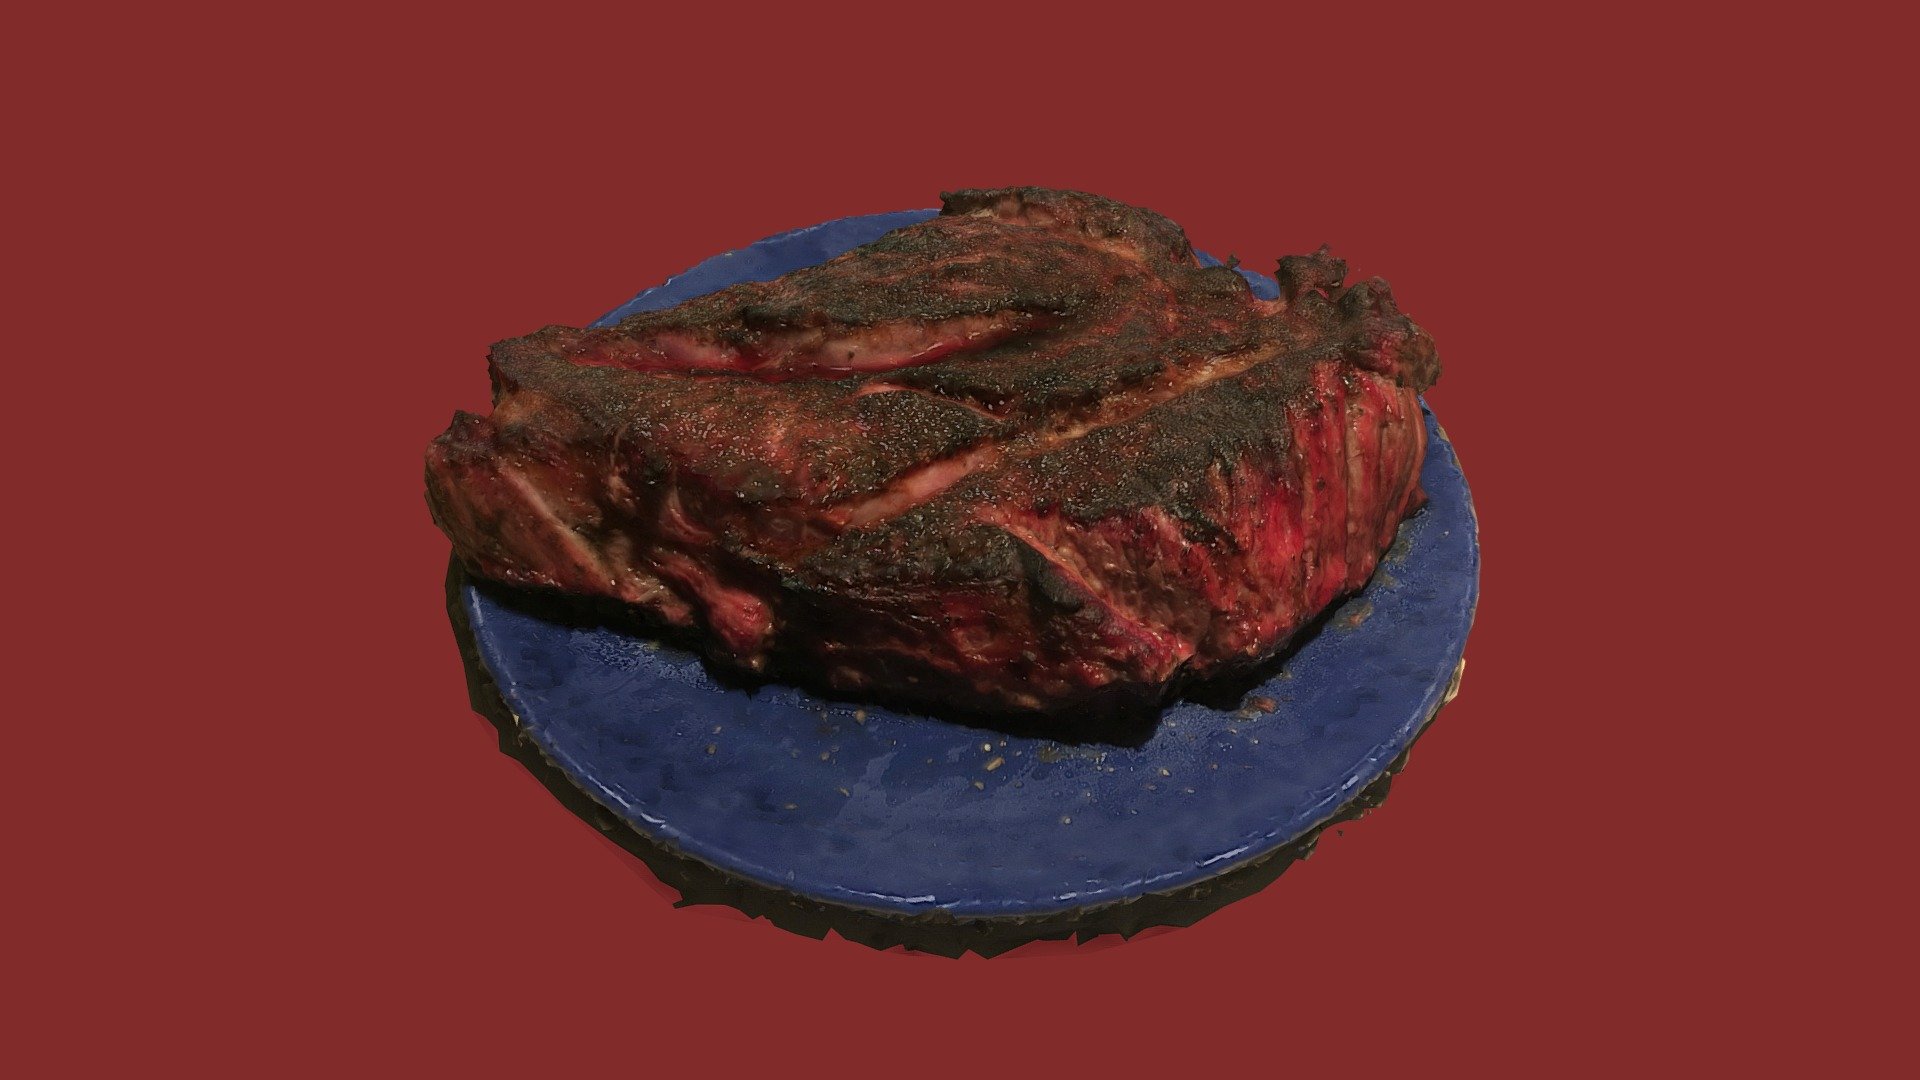 Last week-end, we cooked with Raphaël this amazing côte de boeuf. Reminds me good times at Sketchfab's team event!

Want to see the low poly version of it? Here it is, by James.

————————————————————————————————————————————————————————————— 

DOWNLOAD — Also available for dowload: sketchfab.com/louis/store

Want to learn more about the technical details of this model? Use Sketchfab's model inspector. Protip, just press &ldquo;I